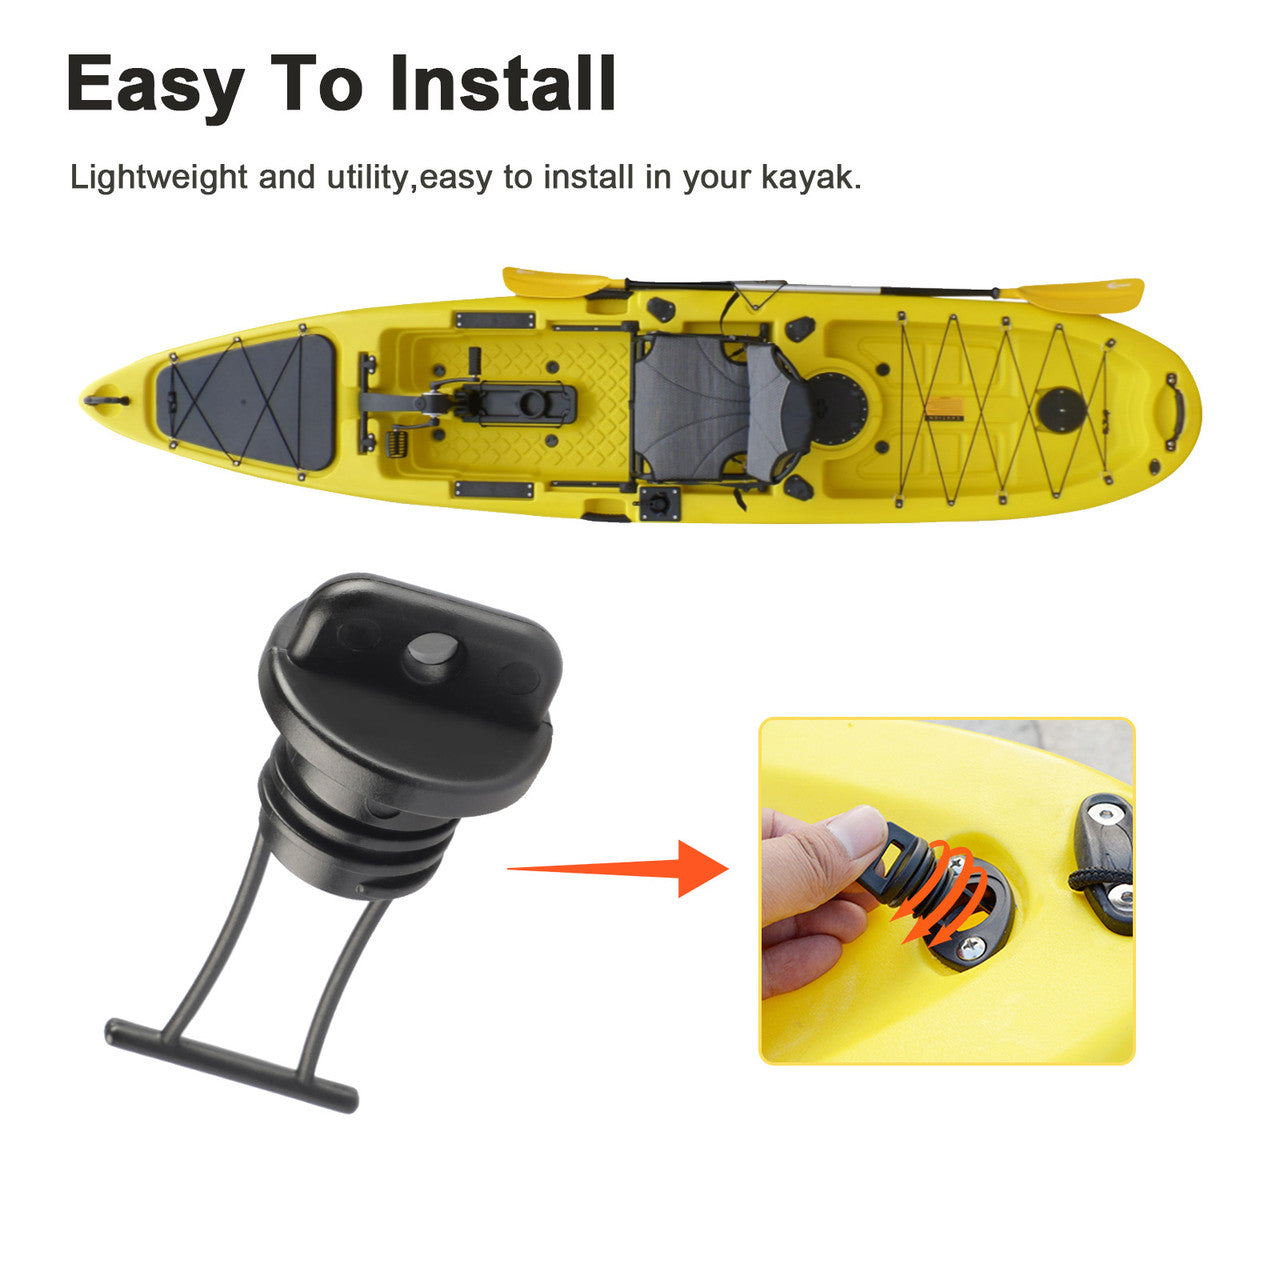 Universal Kayak Drain Plug for Preventing Water from Entering